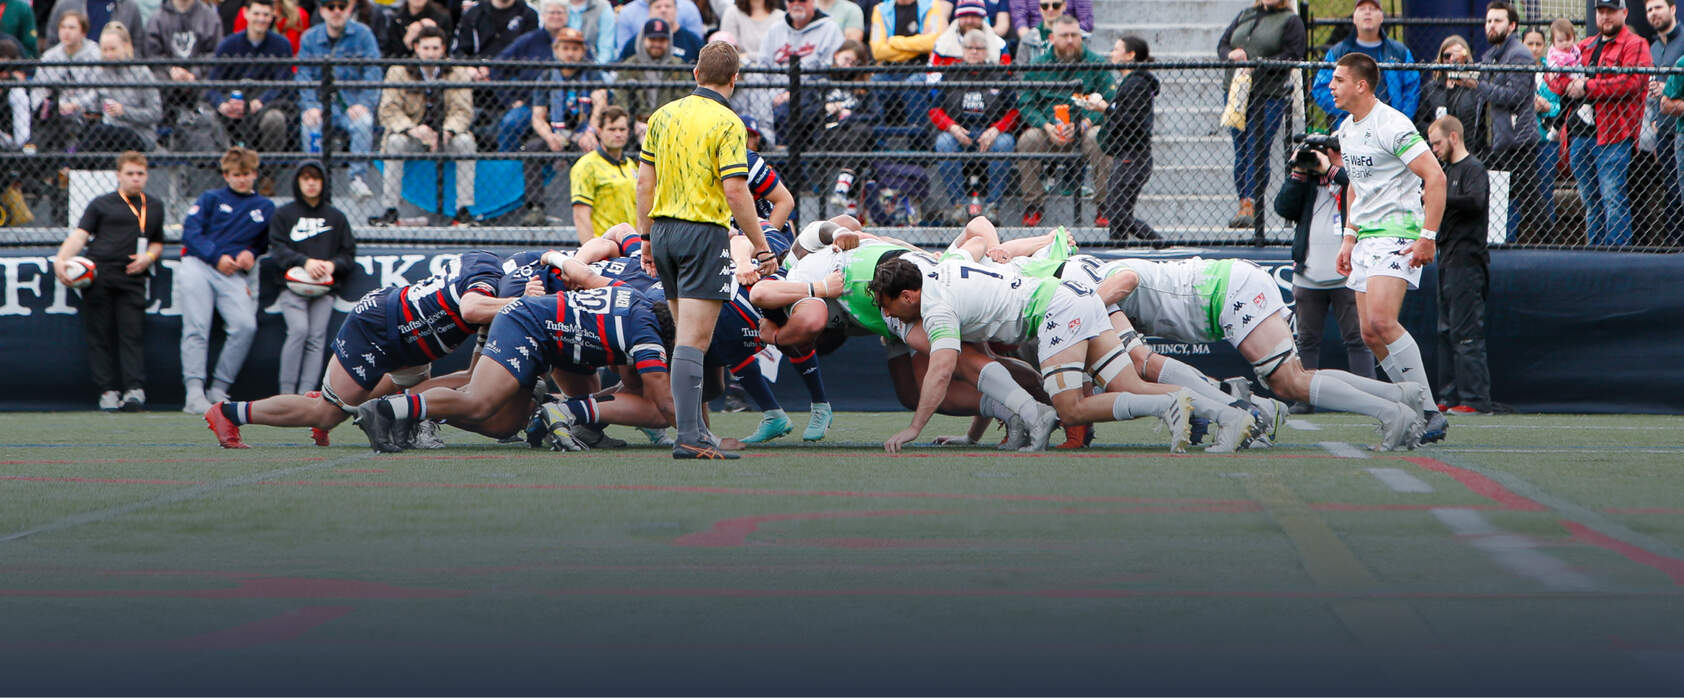 Major League Rugby match featuring the New England Free Jacks vs Seattle Seawolves